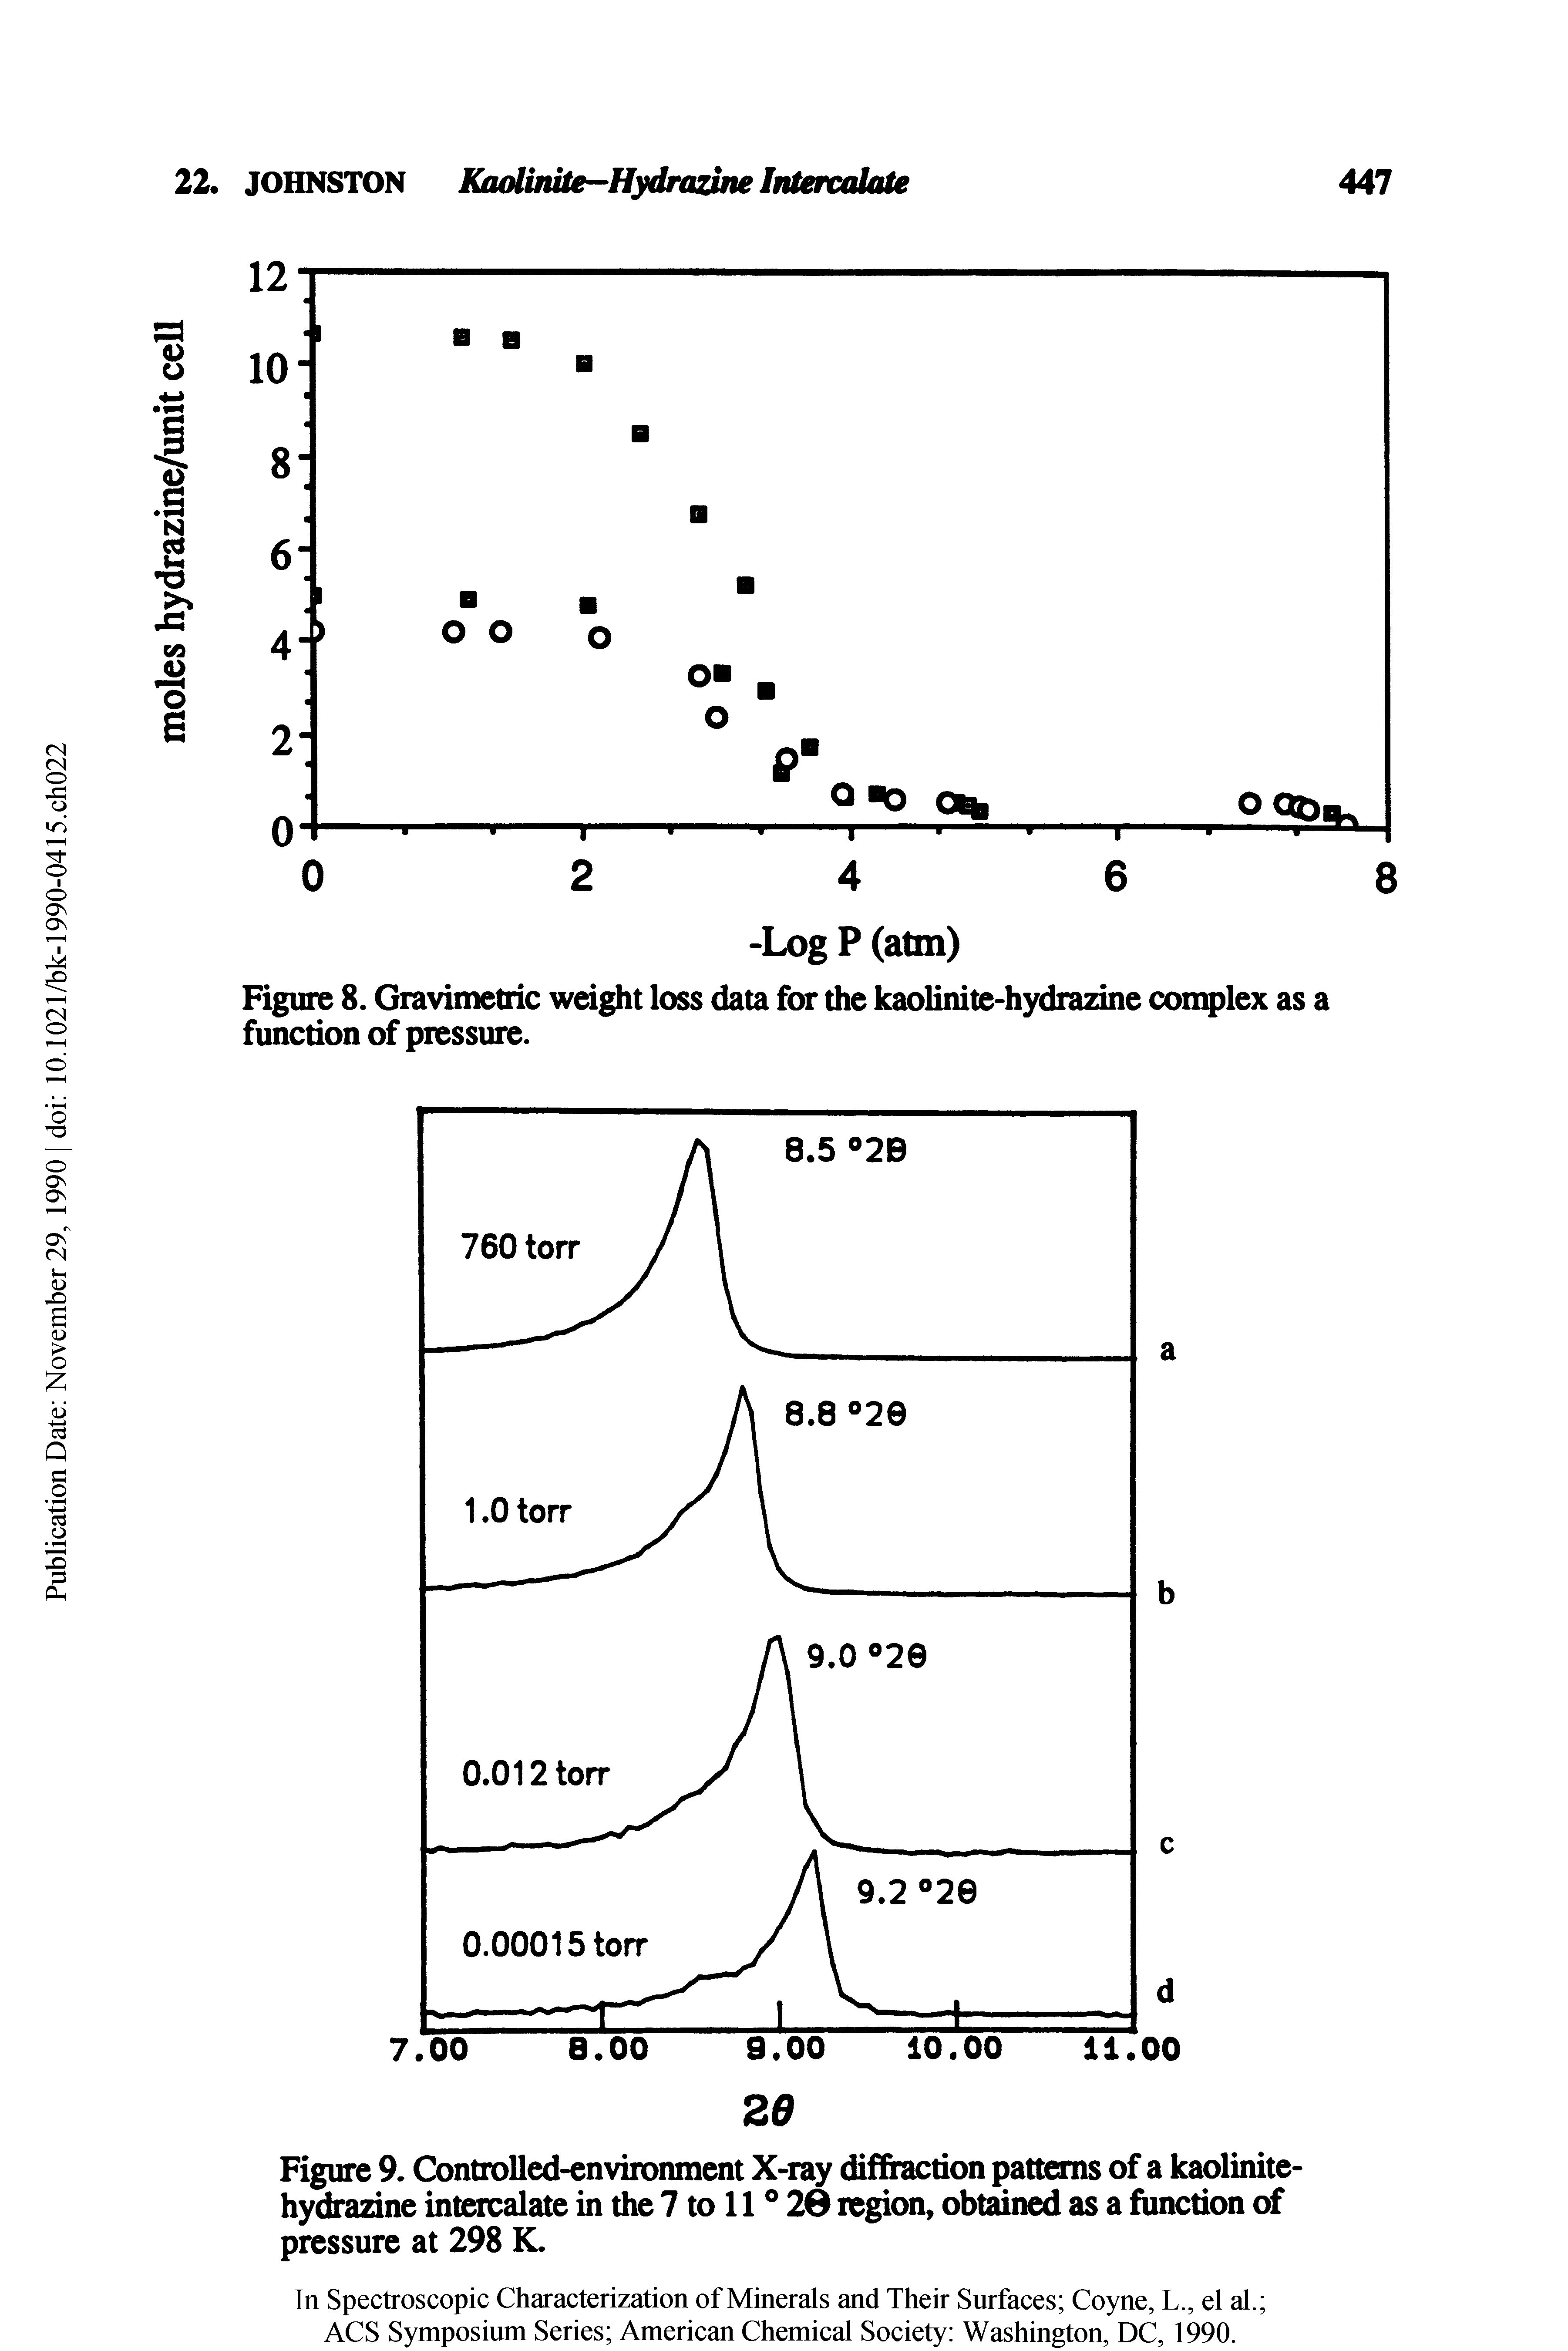 Figure 9. Controlled-environment X-ray diffraction patterns of a kaolinite-hydrazine intercalate in the 7 to 11 ° 20 region, obtained as a function of pressure at 298 K.